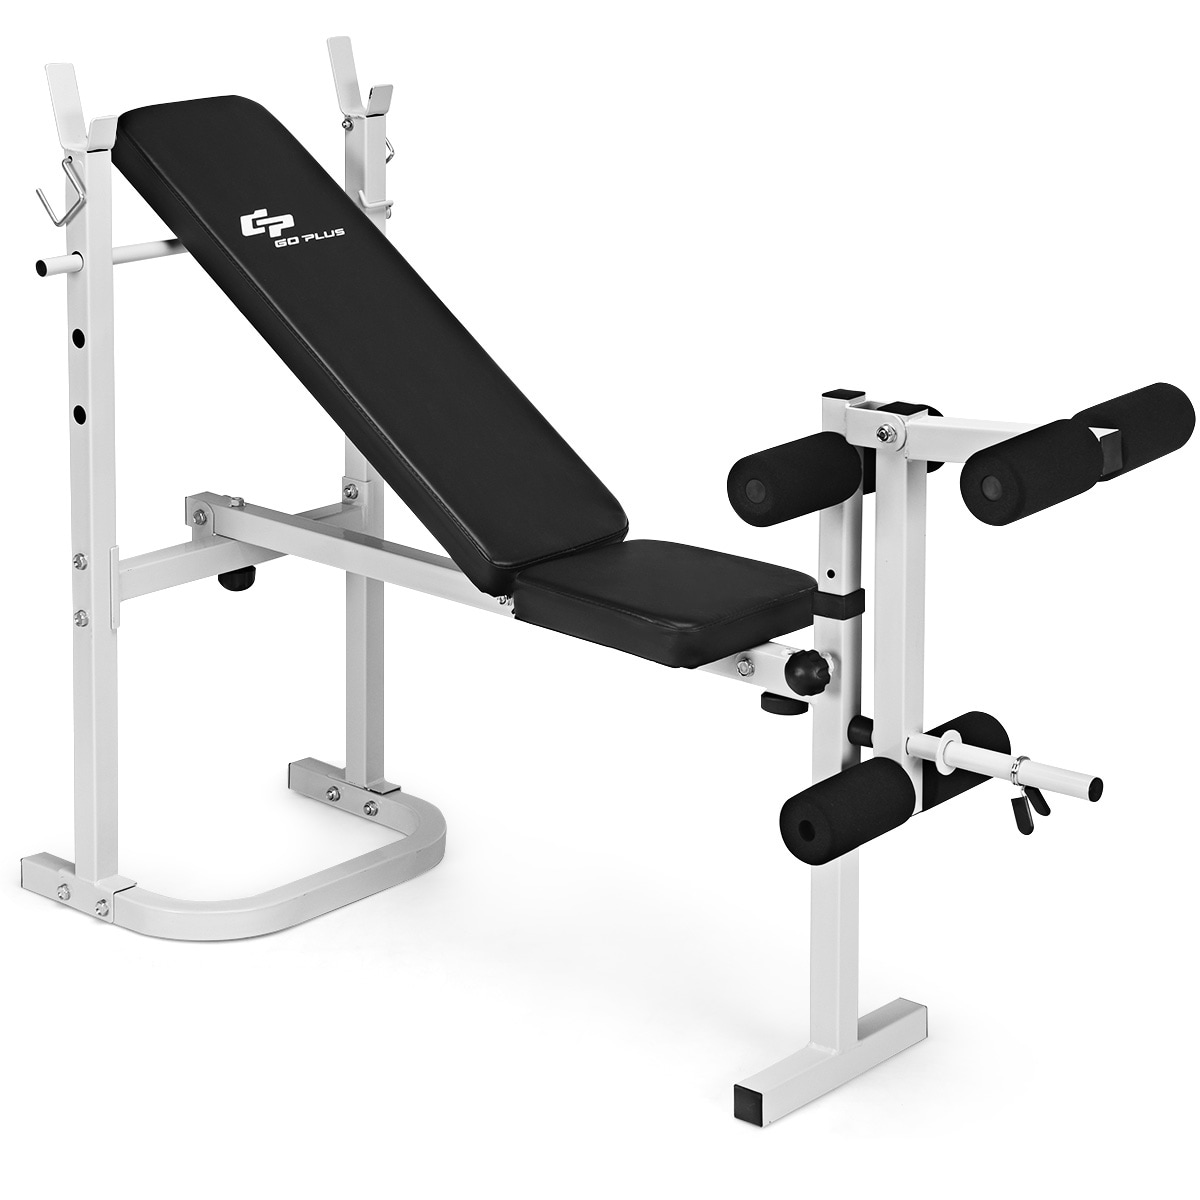 Adjustable Folding Weight Lifting Flat Incline Bench Fitness Safety Workout 